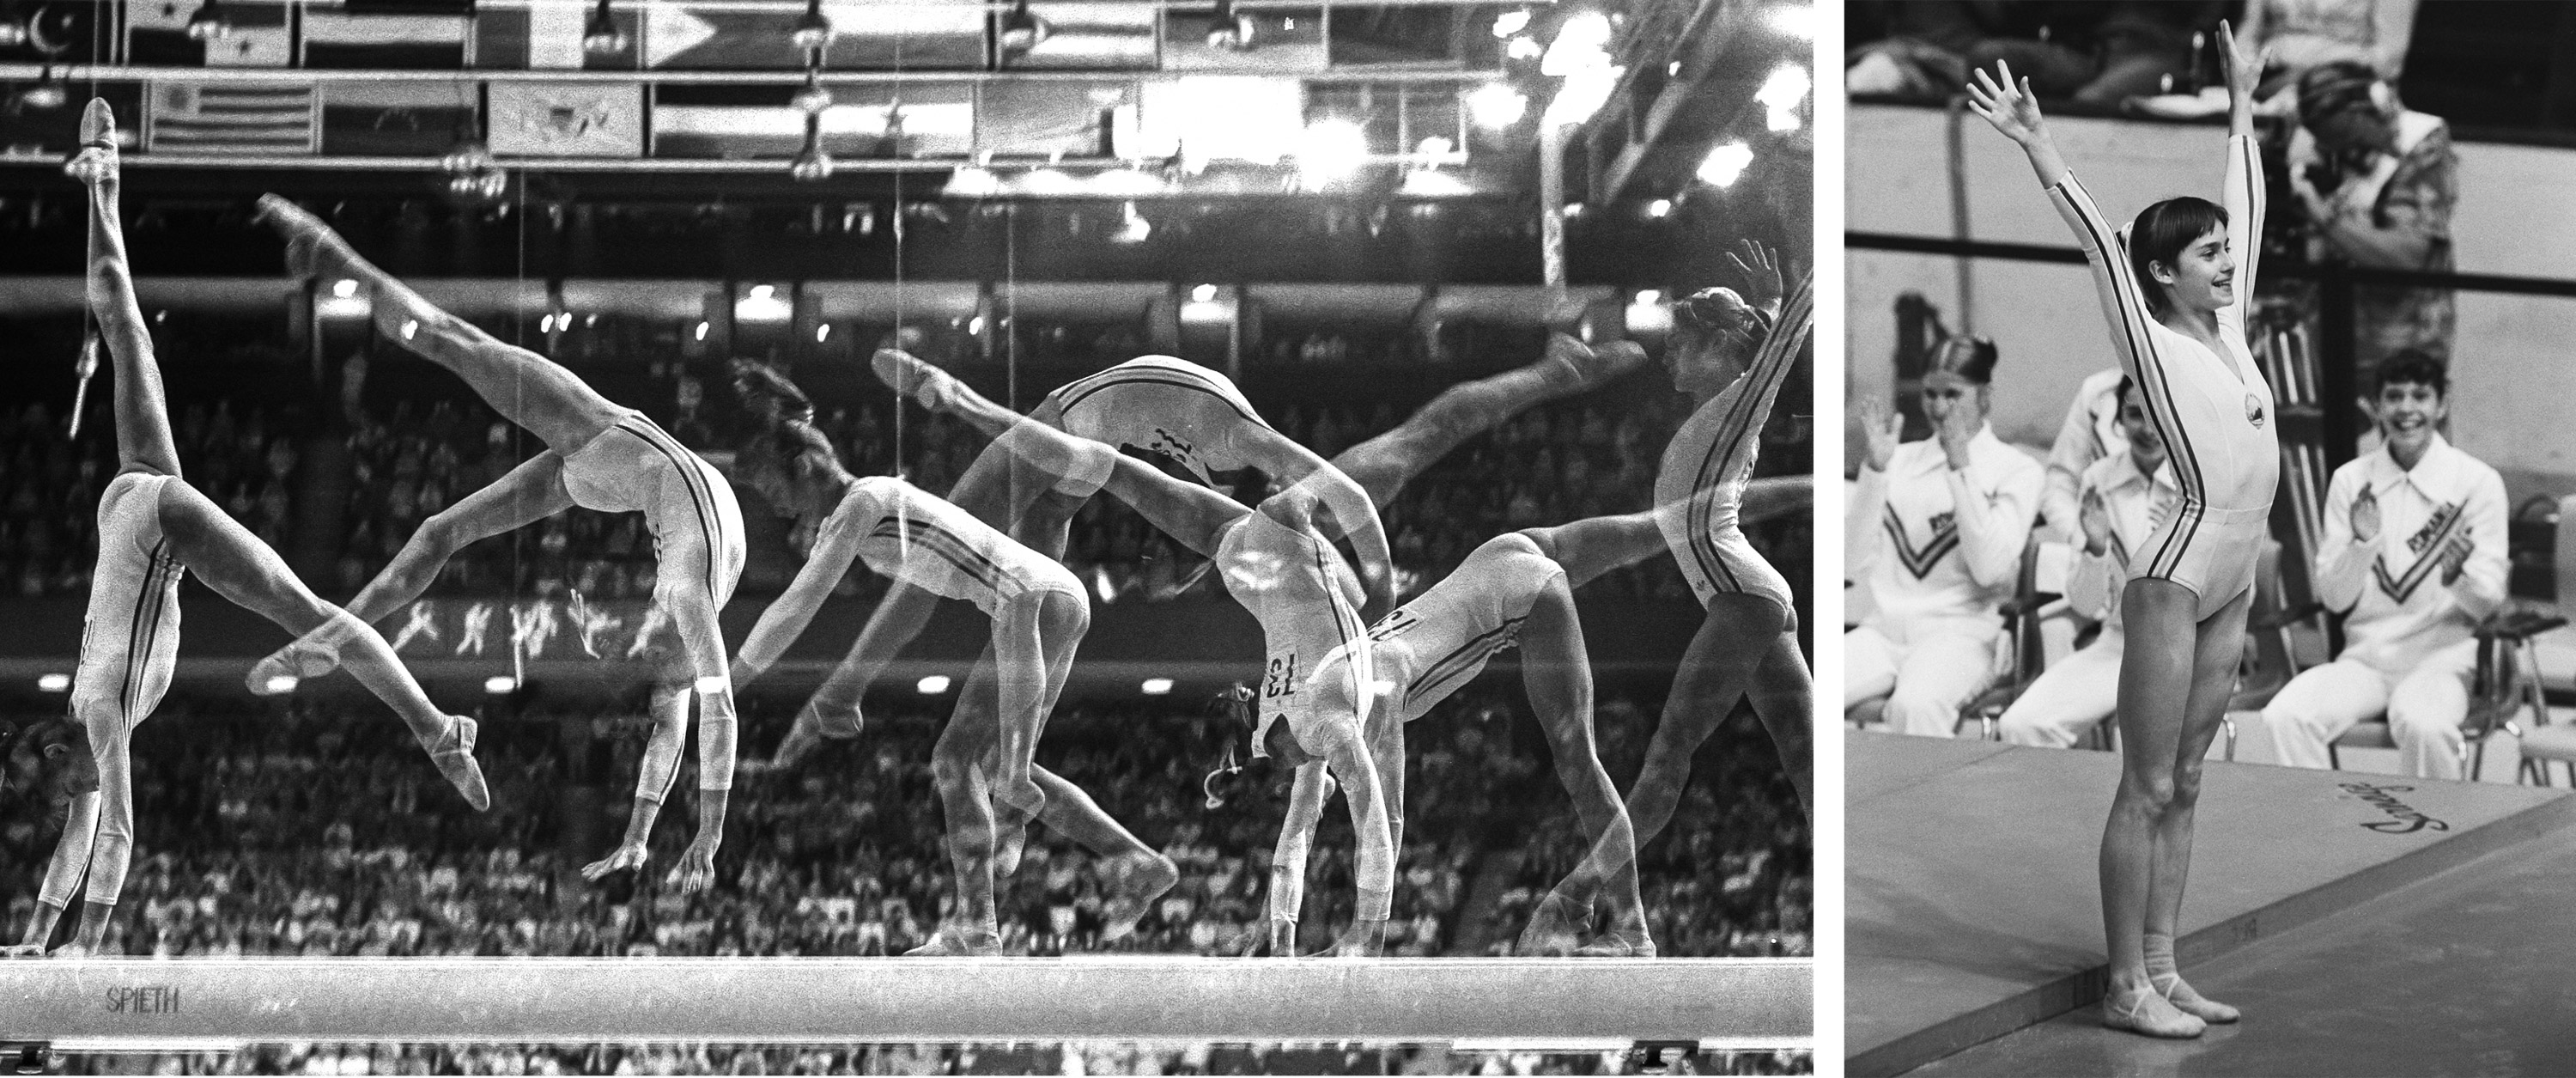 a multiple exposure image of Nadia Comaneci on the balance beam, next to an image of her with both arms raised.